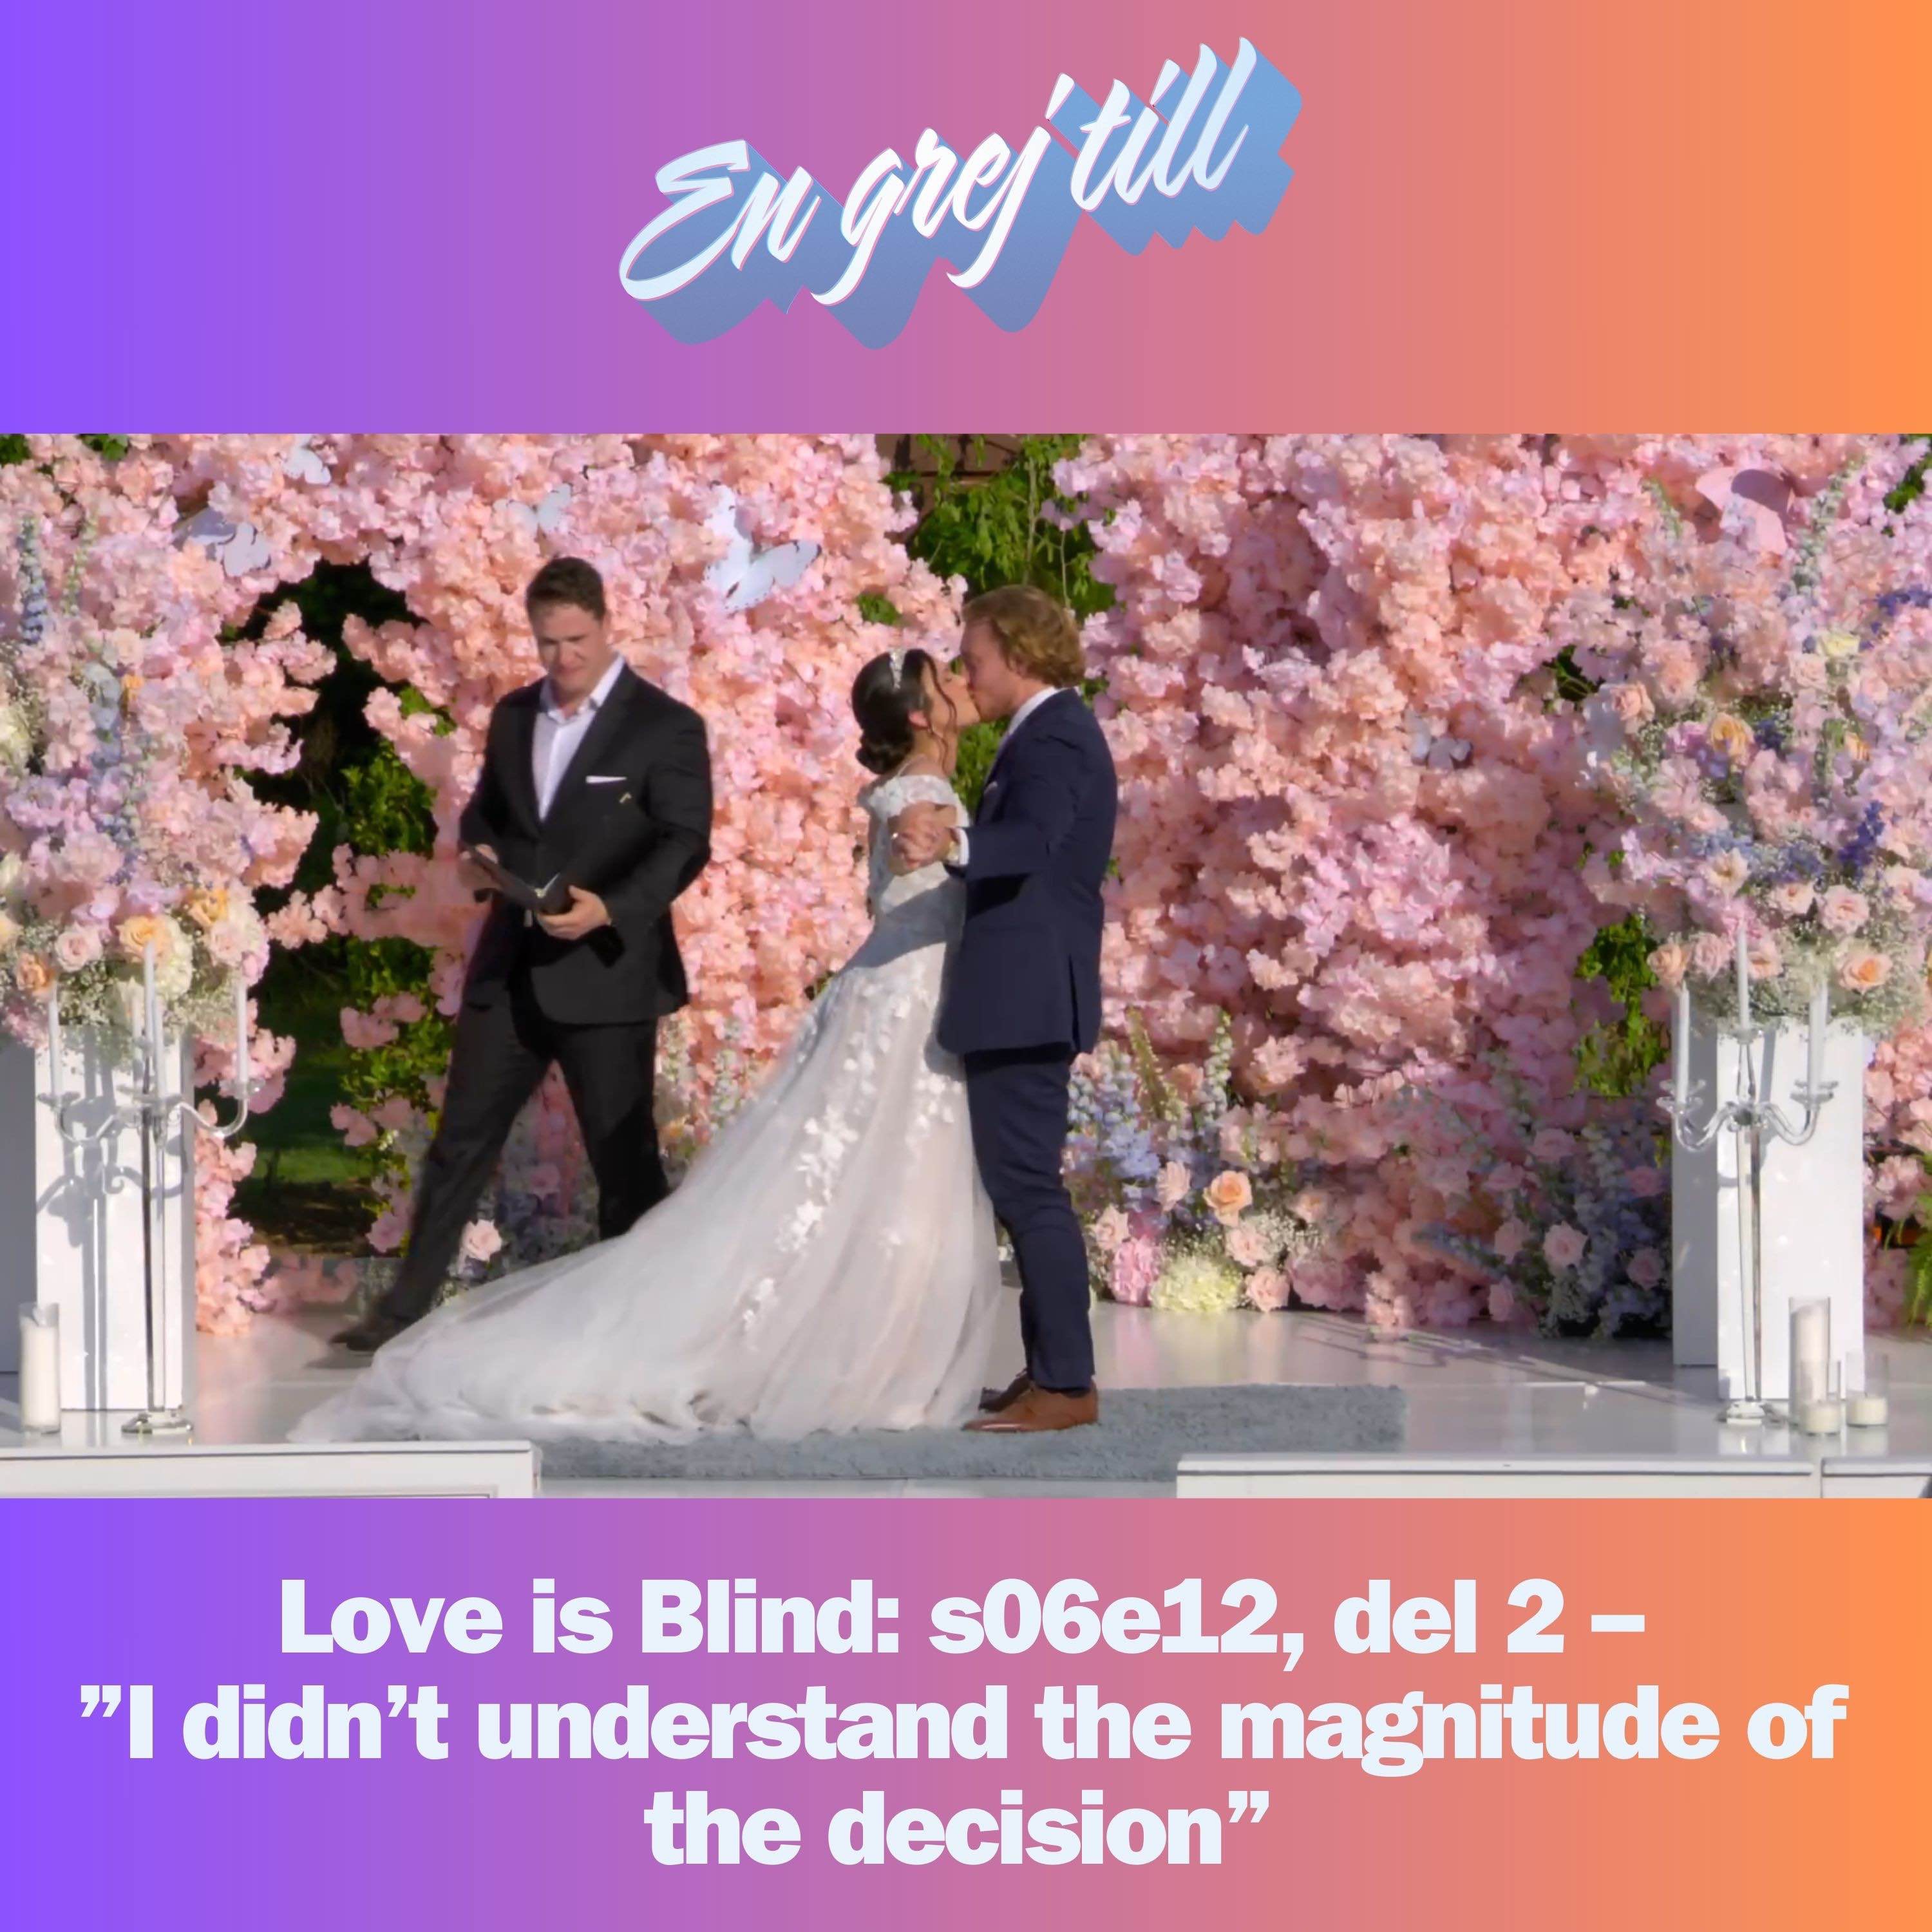 cover art for En grej till: Love is Blind: s06e12, del 2 – ”I didn’t understand the magnitude of the decision”